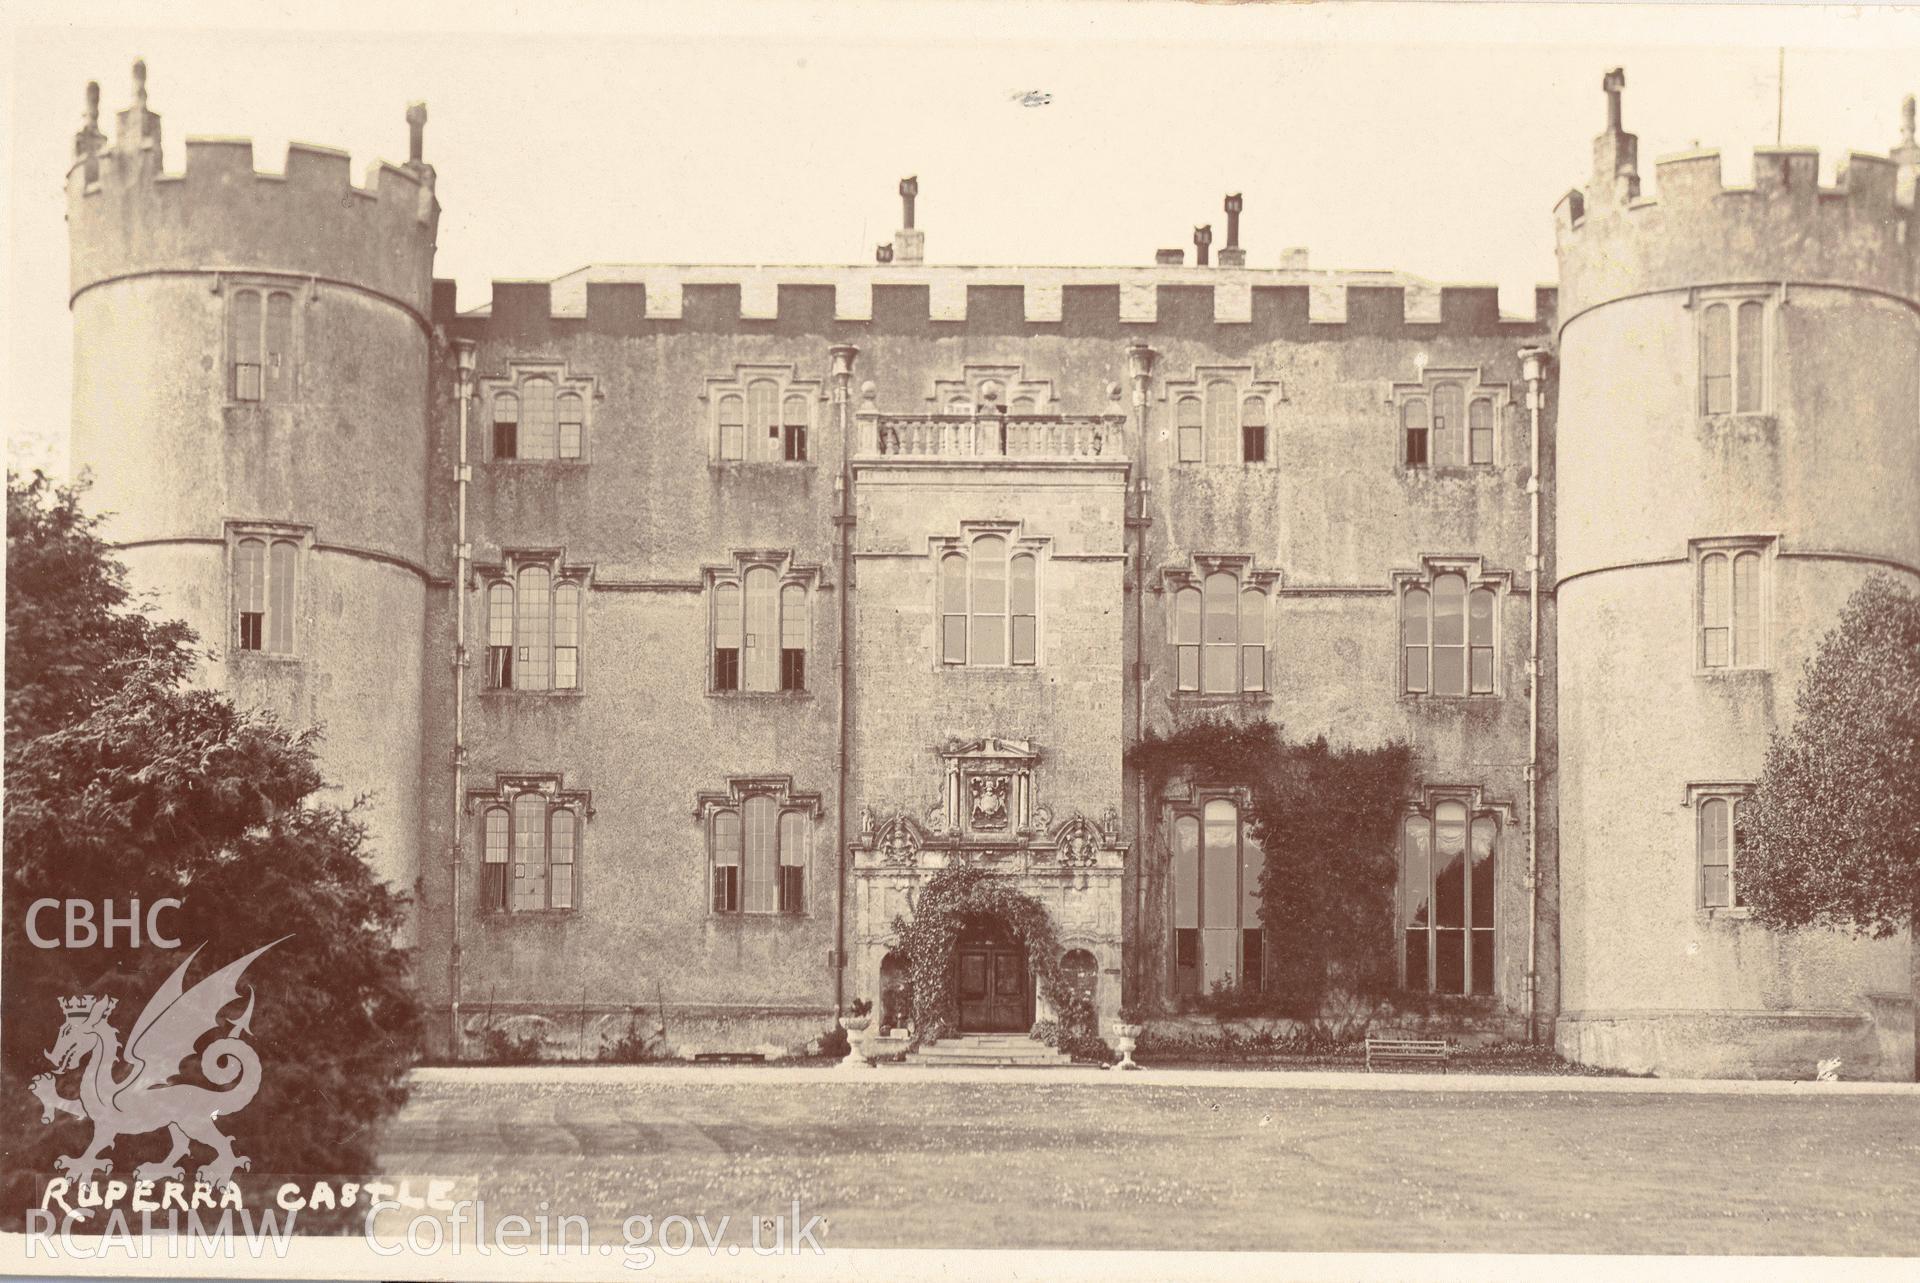 Digitised postcard image of Ruperra Castle, Draethen, Lilywhite Ltd. Produced by Parks and Gardens Data Services, from an original item in the Peter Davis Collection at Parks and Gardens UK. We hold only web-resolution images of this collection, suitable for viewing on screen and for research purposes only. We do not hold the original images, or publication quality scans.